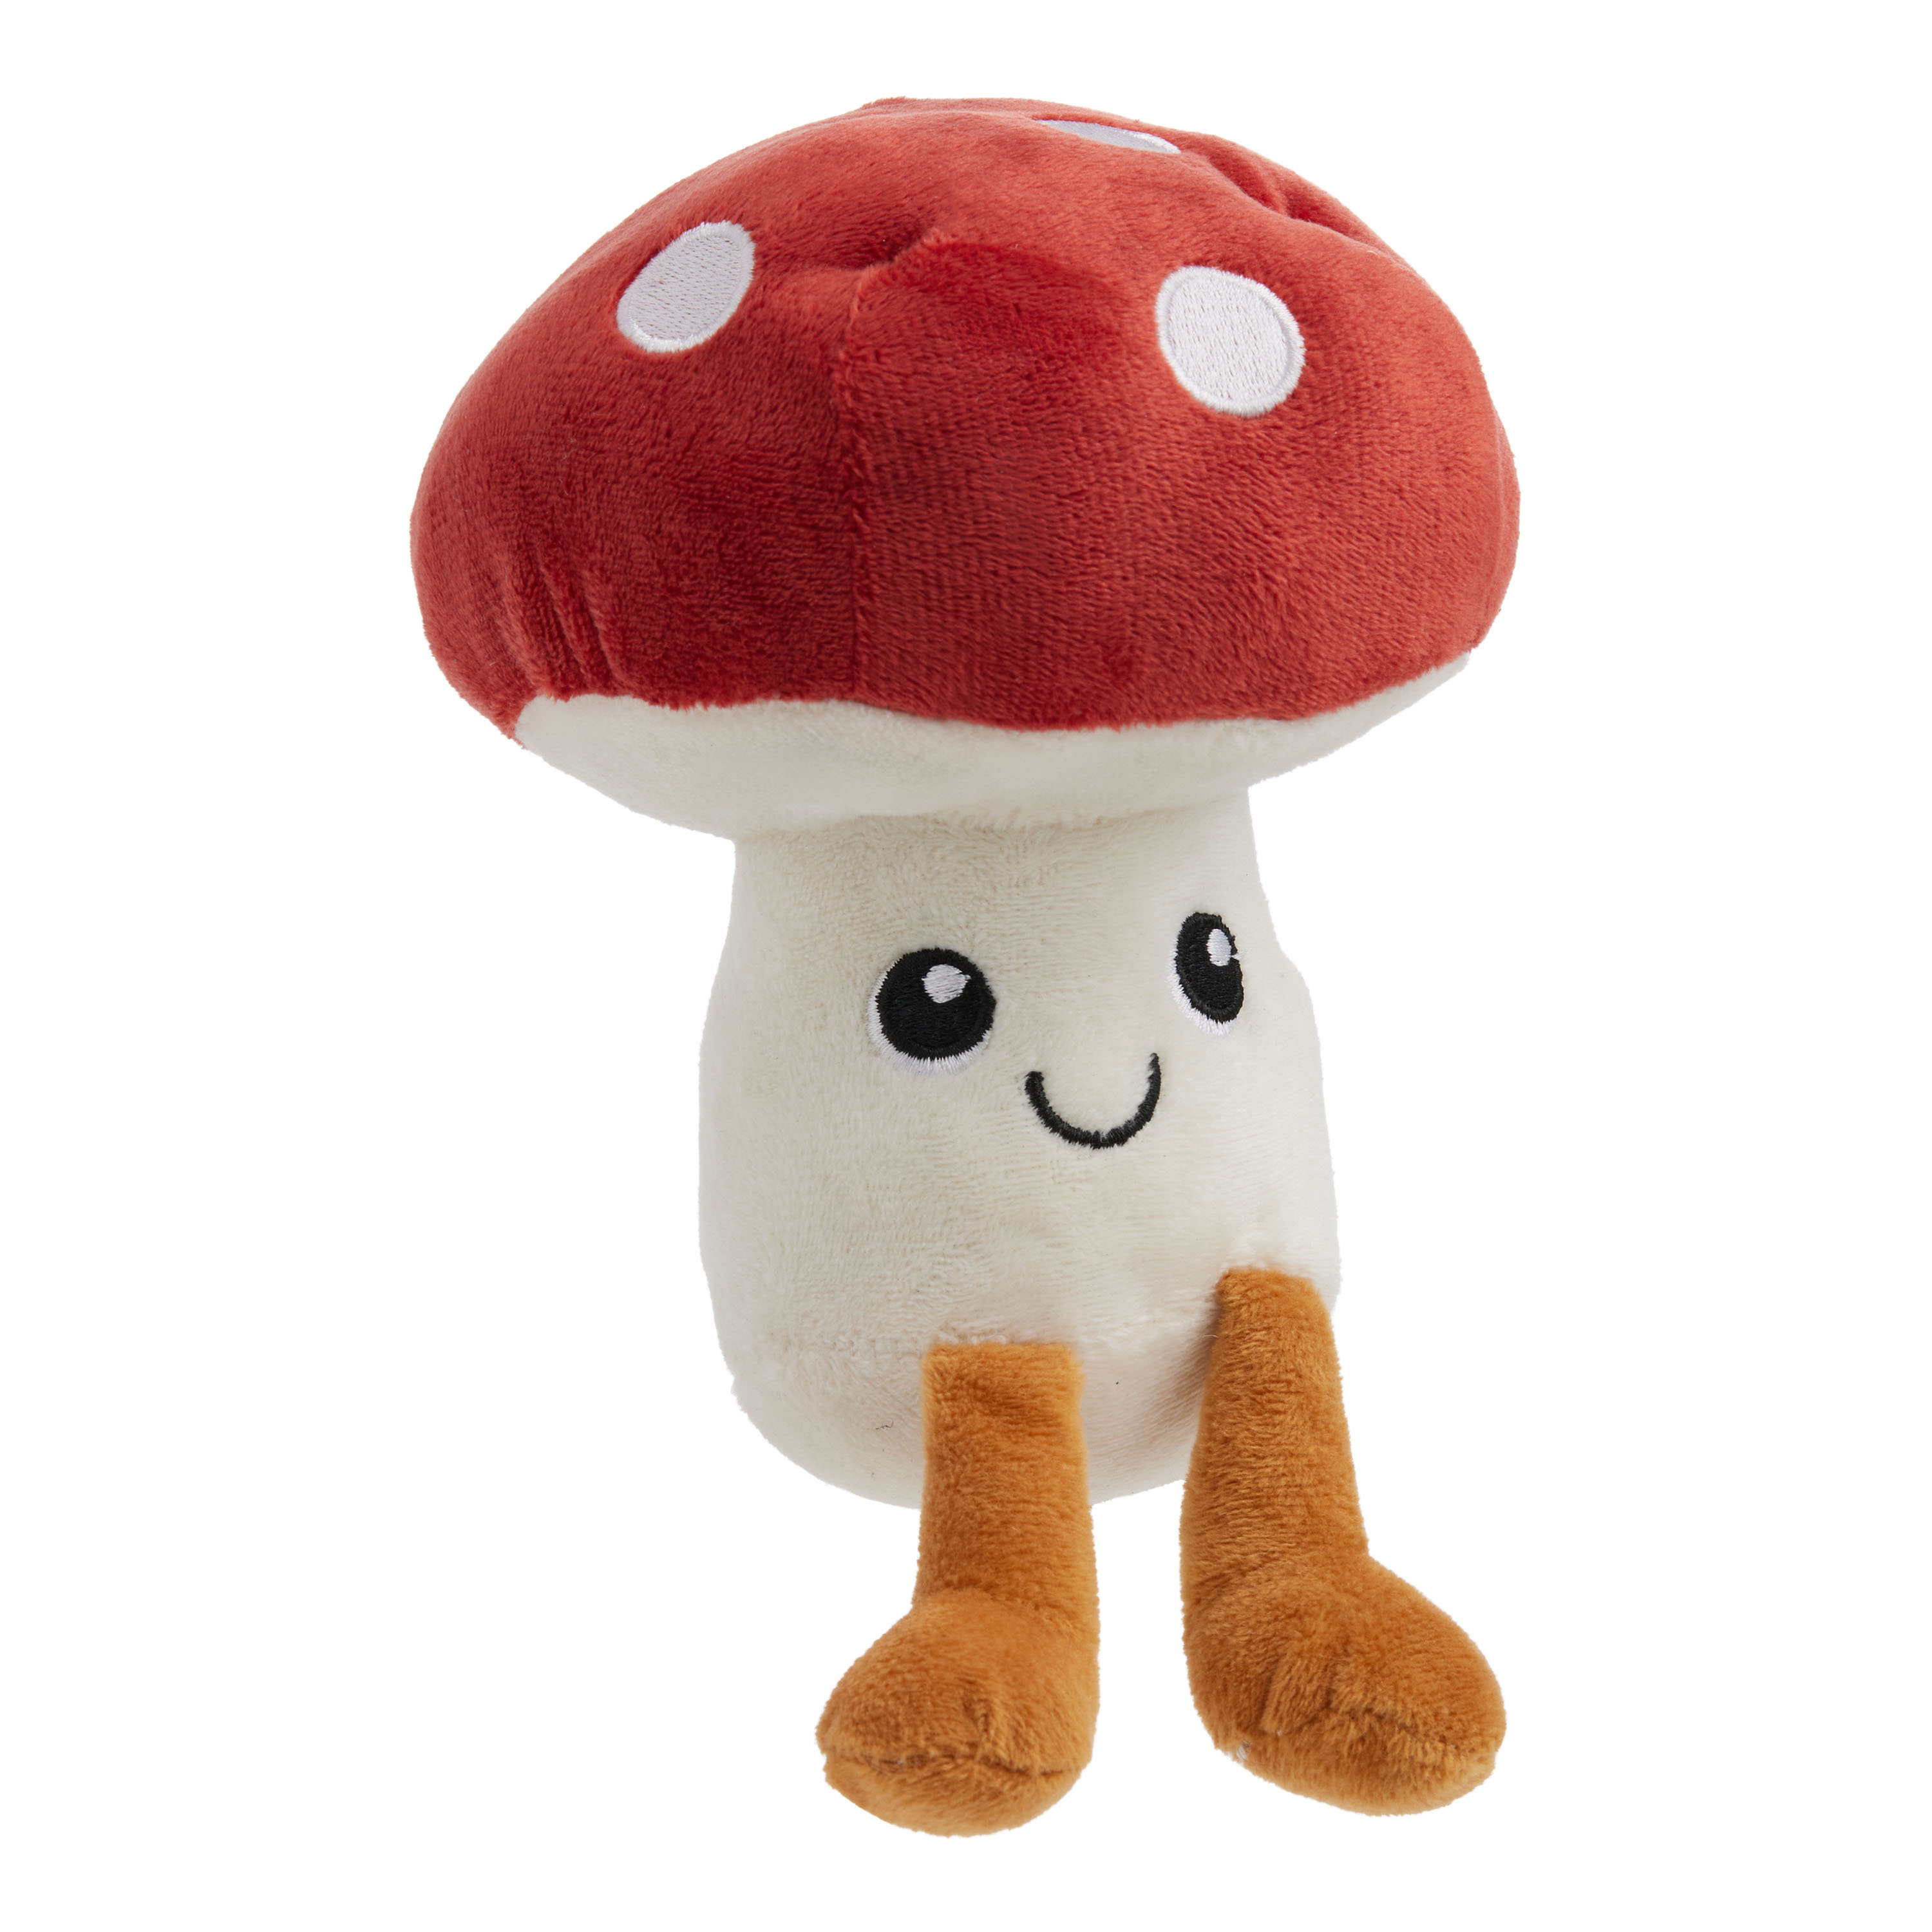 Bow Wow Red and White Plush Mushroom Squeaky Dog Toy - World Market